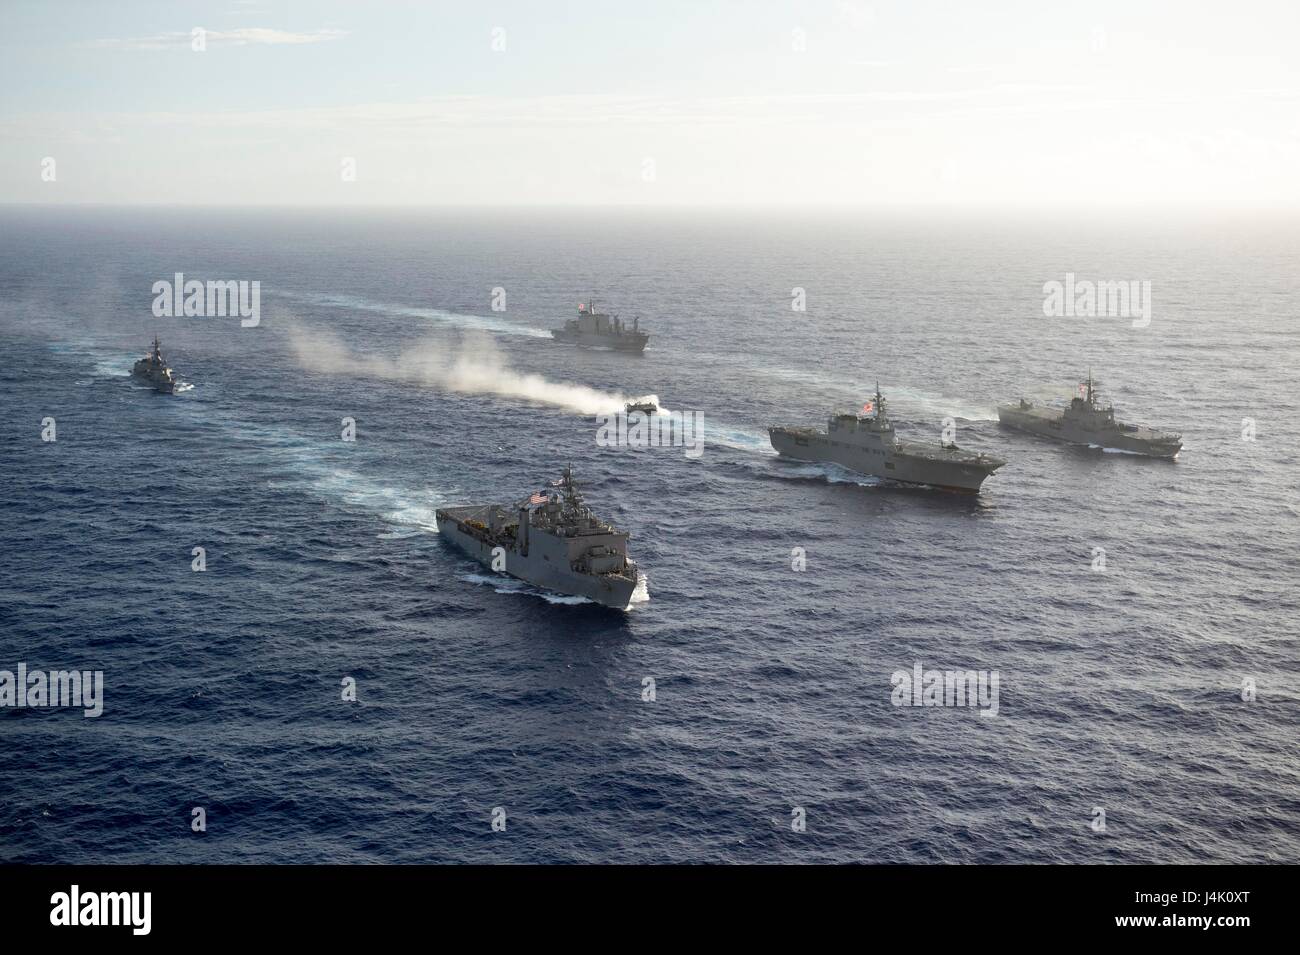 161106-N-ZK021-159 PACIFIC OCEAN (Nov. 6, 2016) - Ships participating in Keen Sword 2017 steam in formation during a photo exercise. Keen Sword 17 is a joint and bilateral field training exercise (FTX) between U.S. and Japanese forces meant to increase readiness and interoperability within the framework of the U.S. – Japan alliance. (U.S. Navy photo by Petty Officer First Class Nardel Gervacio/Released) Stock Photo